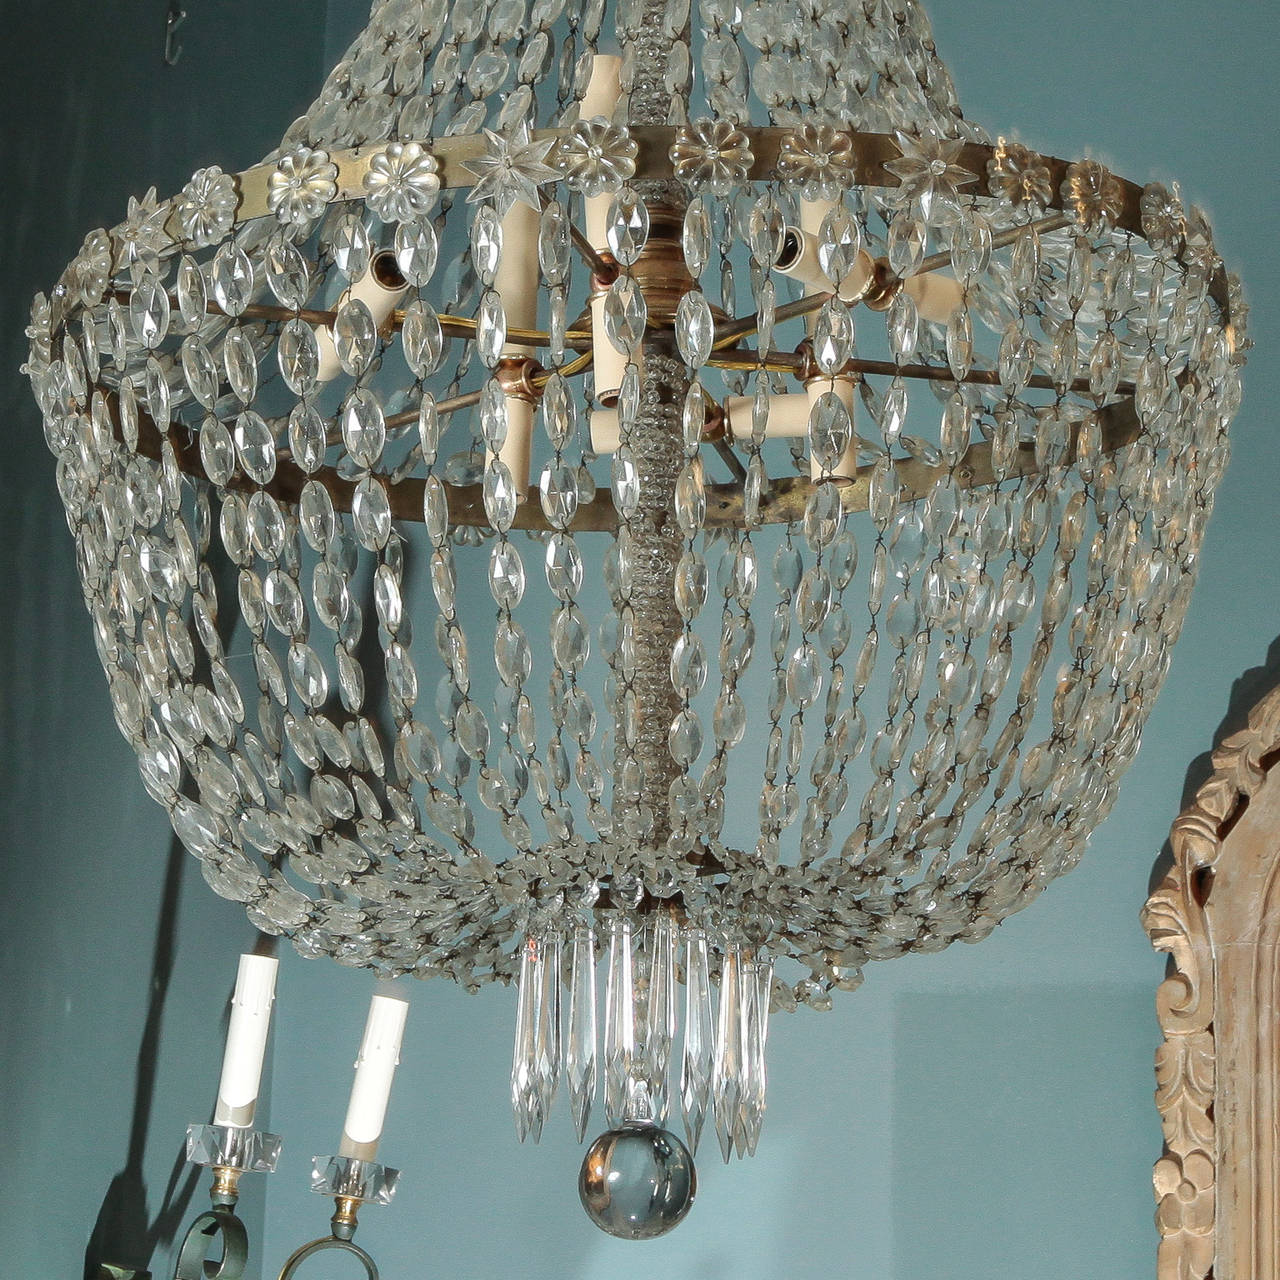 Found in France, this extra large all crystal chandelier dates from approximately 1900 and has a basket shaped brass frame draped with oval shaped, faceted crystal beads.  At the bottom is a fringe of dagger shaped crystal pendants surrounding a